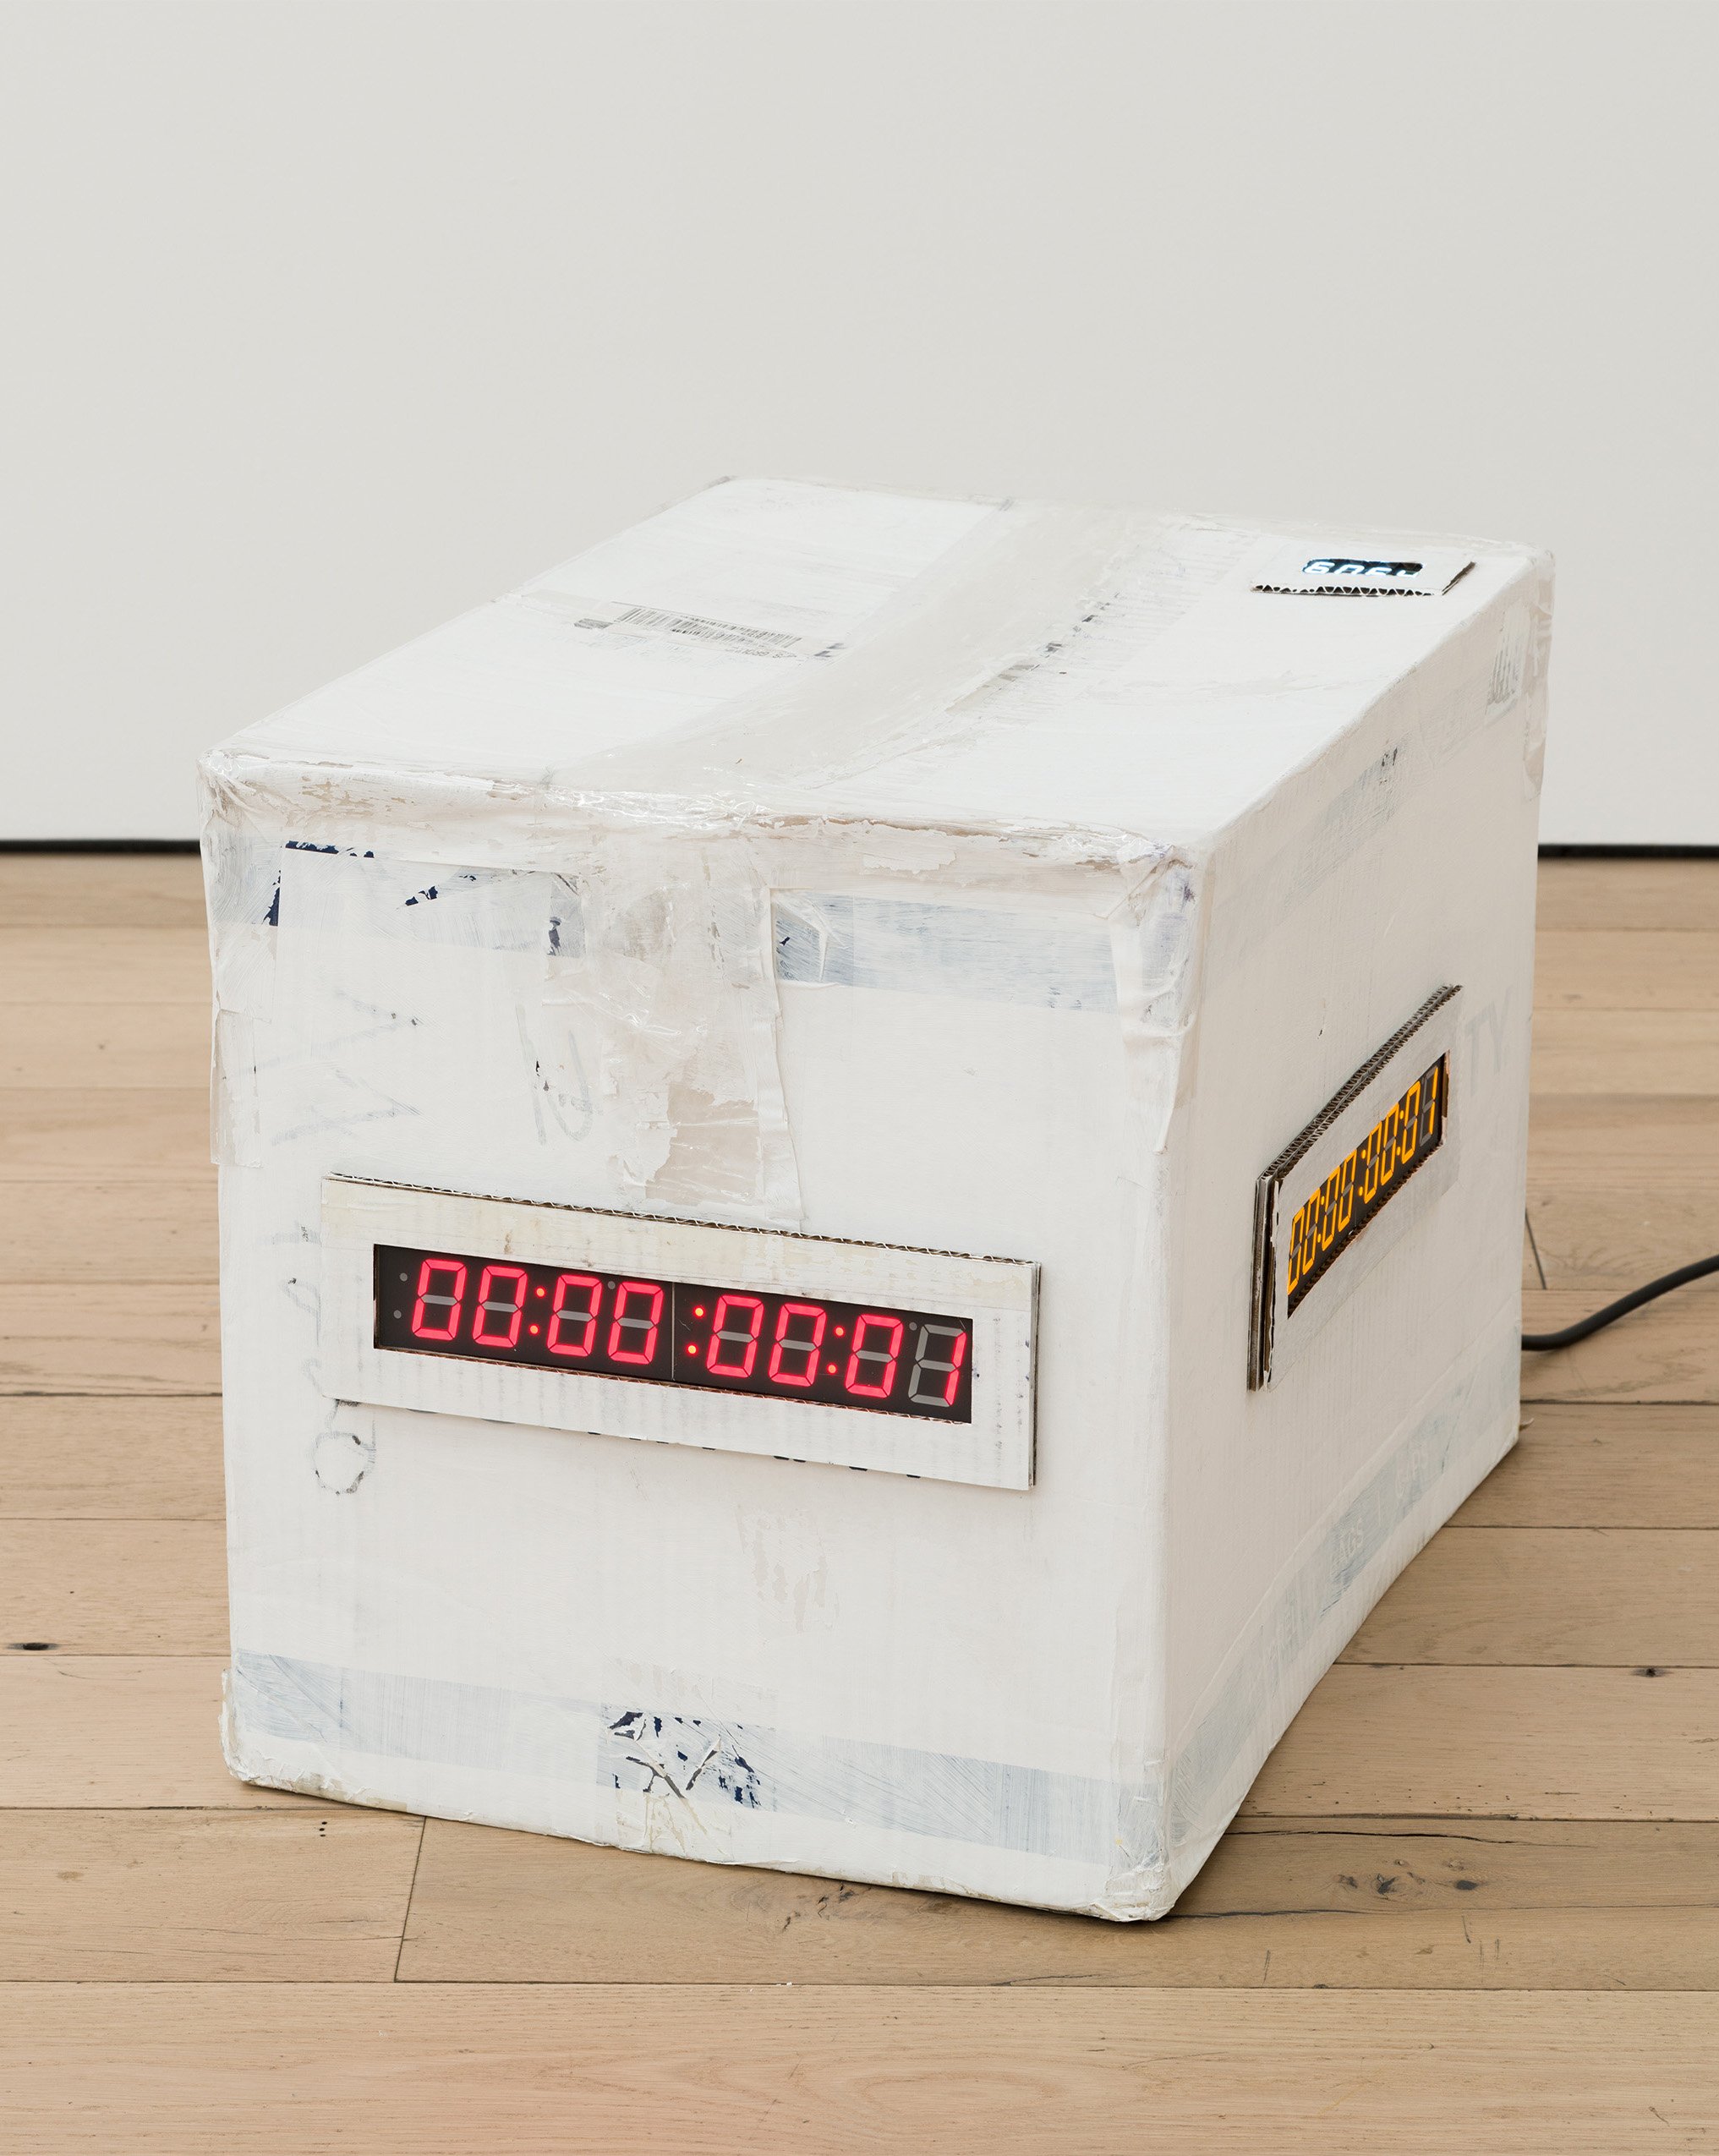  Sandy Williams IV,  Unattended Baggage (Time Capsule) XII , 2022, Timers, motion sensor, cardboard, electronics, gesso, tape, 21 1/2 x 15 1/2 x 16 1/2 in 